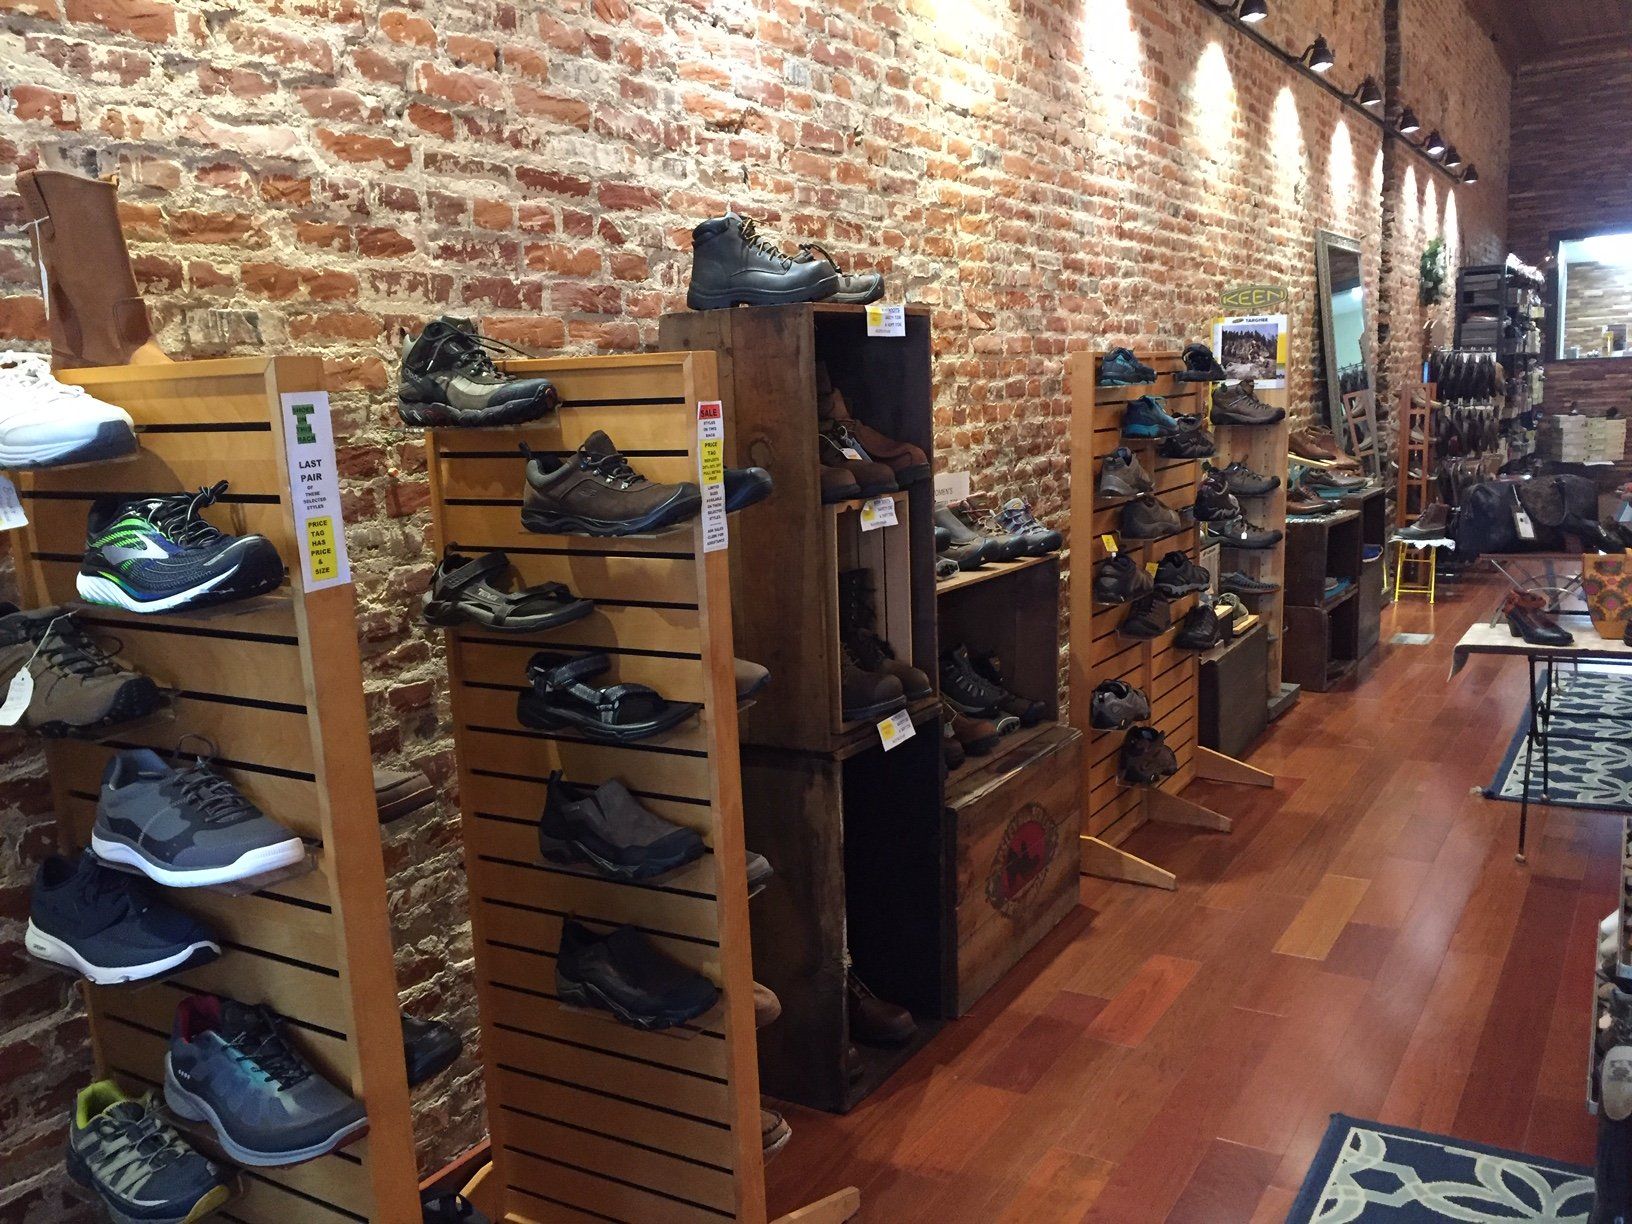 A store filled with lots of shoes and a brick wall.